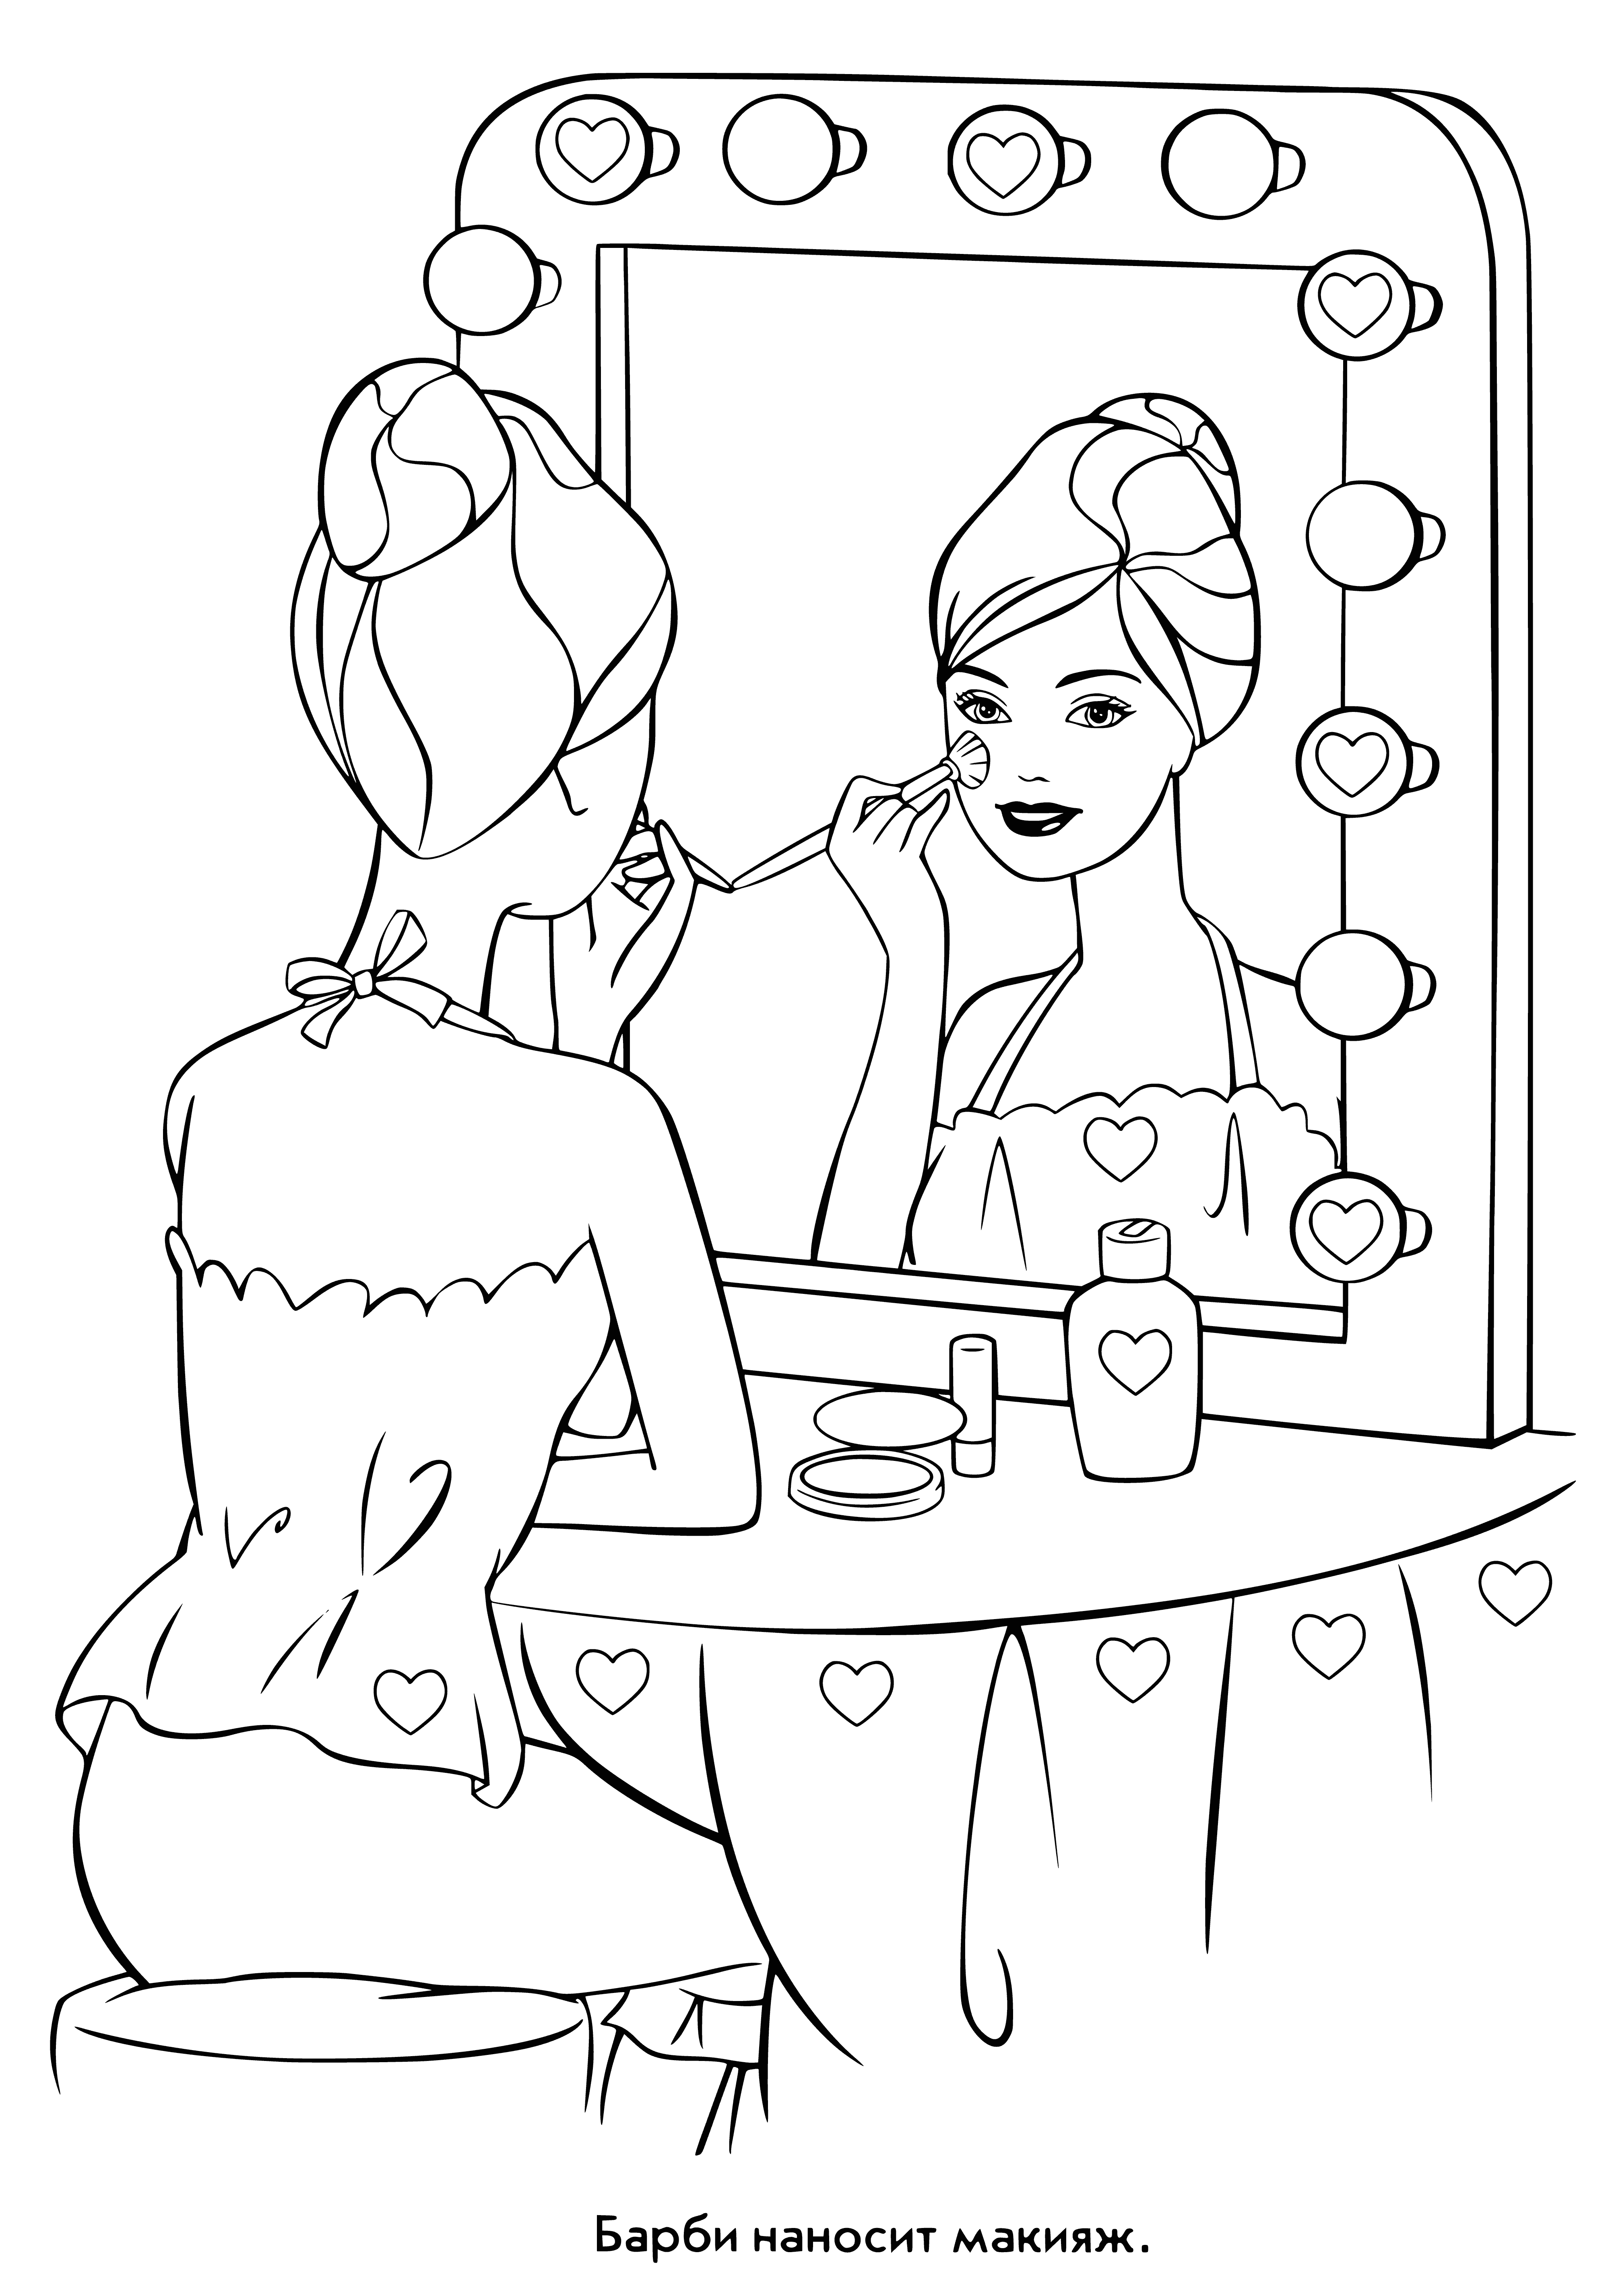 coloring page: Barbie is applying pink lipstick and highlighting her cheeks with a makeup brush while looking in a handheld mirror.